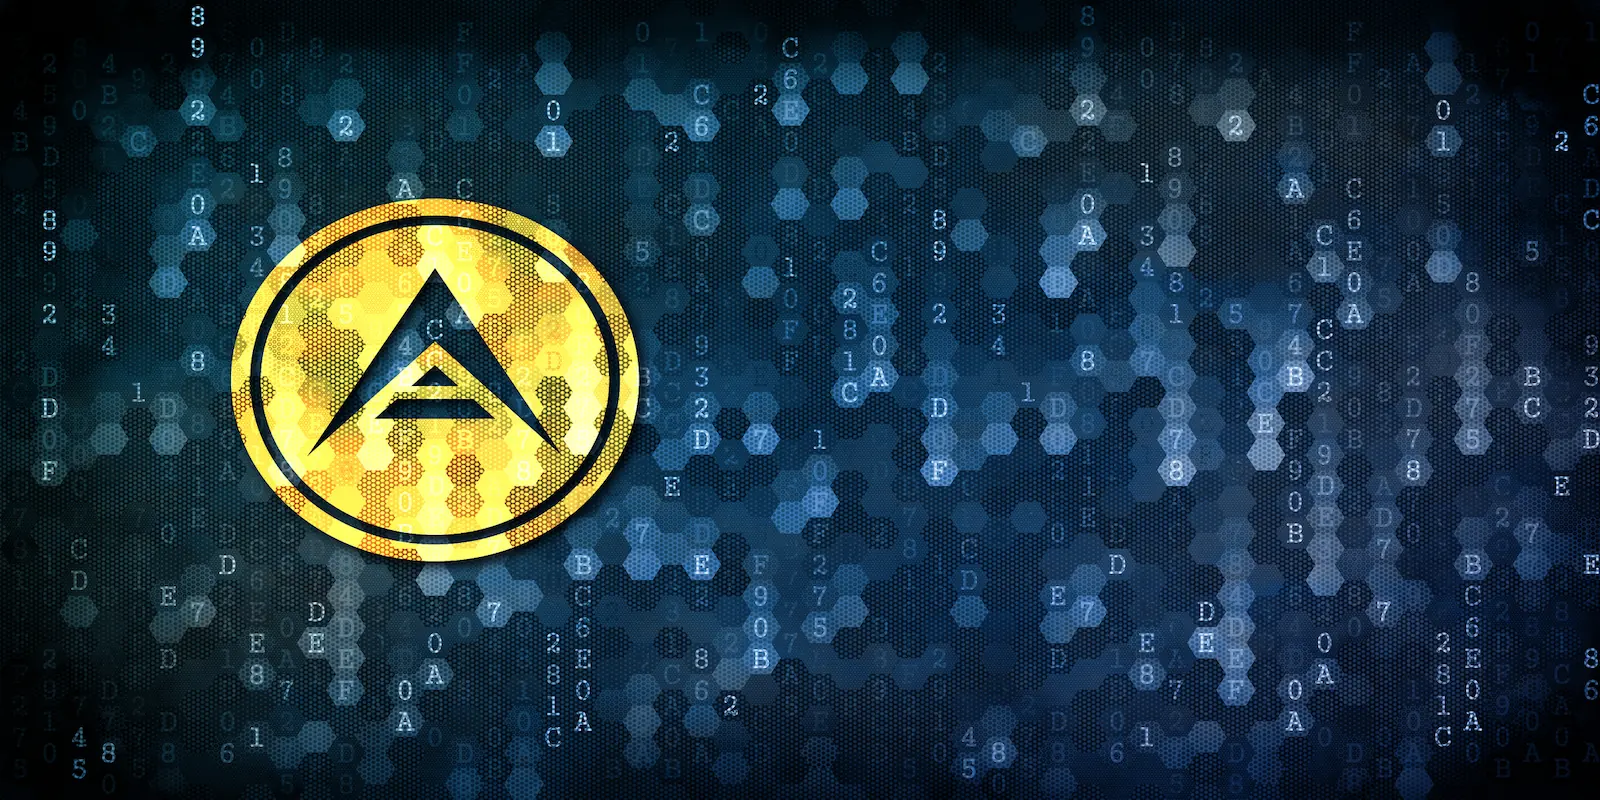 ARK coin price dropped after Binance listed the token's perpetual contract on its platform.